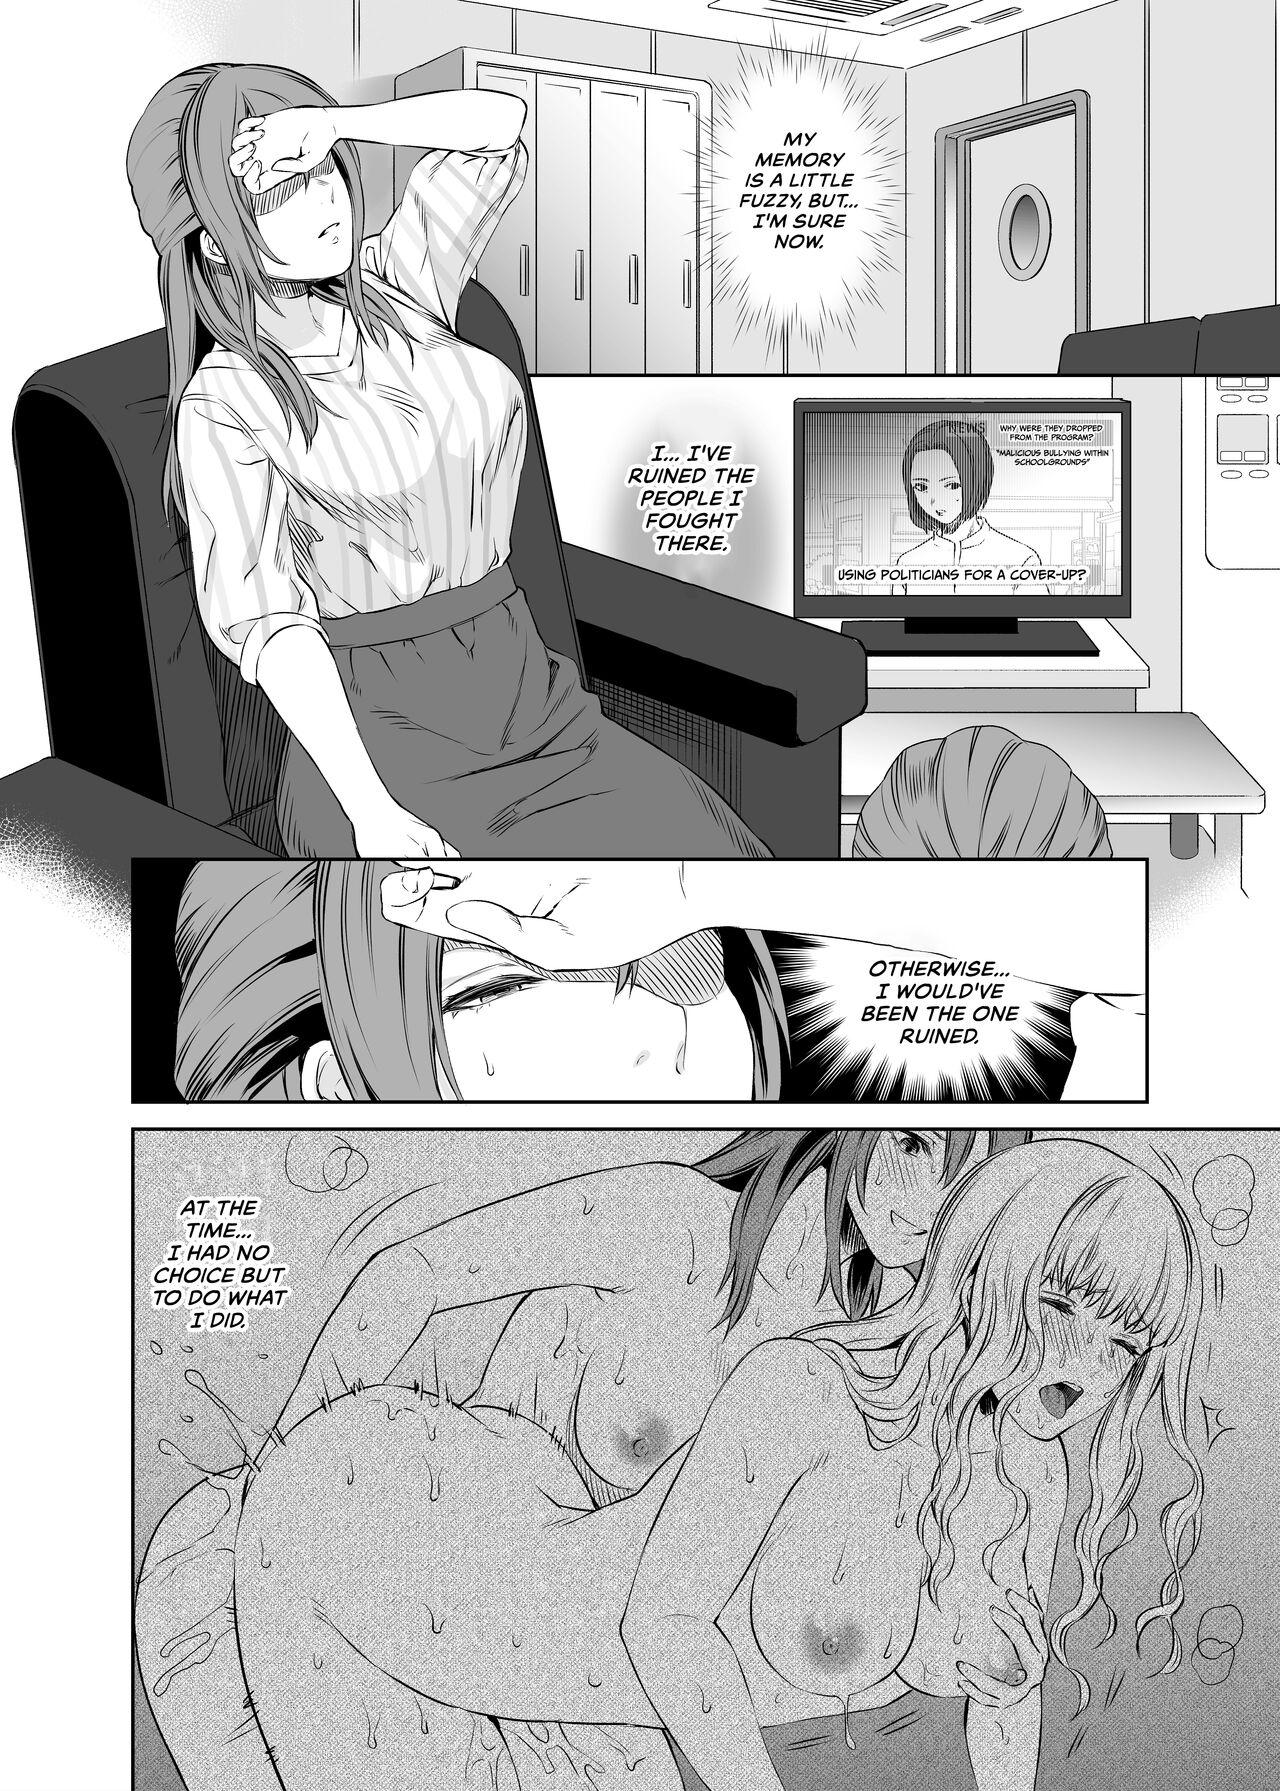 Thot [Remora Works (Meriko)] LesFes Co -Candid Reporting- Vol. 003 [English] - Original Amateur - Page 5